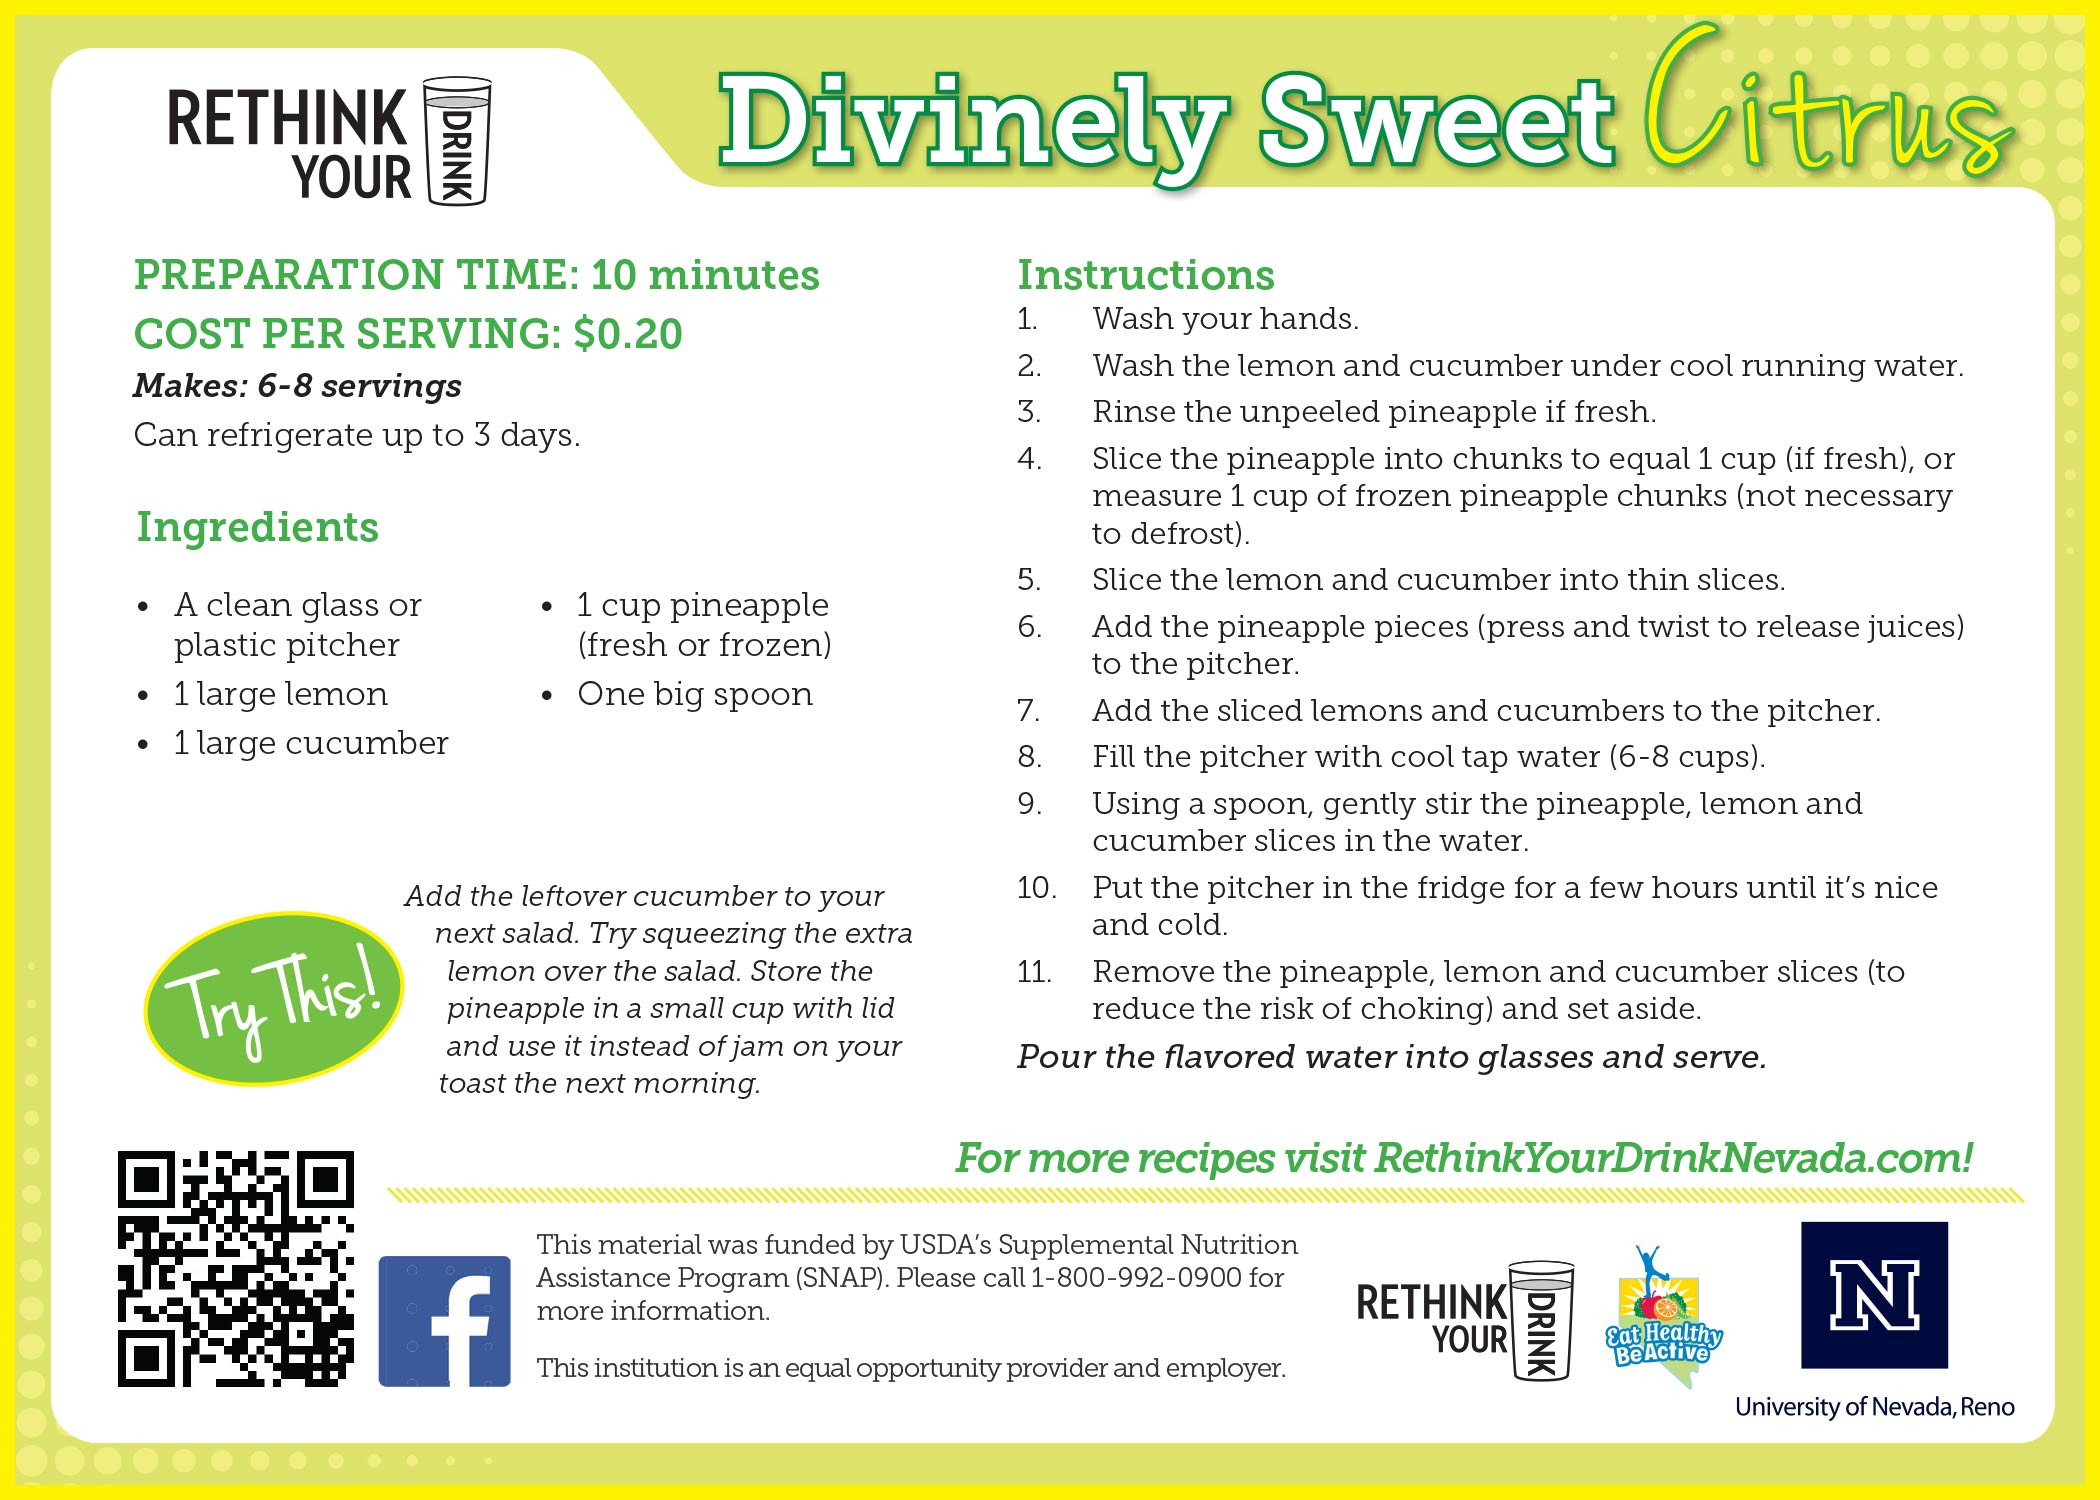 divinely sweet citrus recipe card